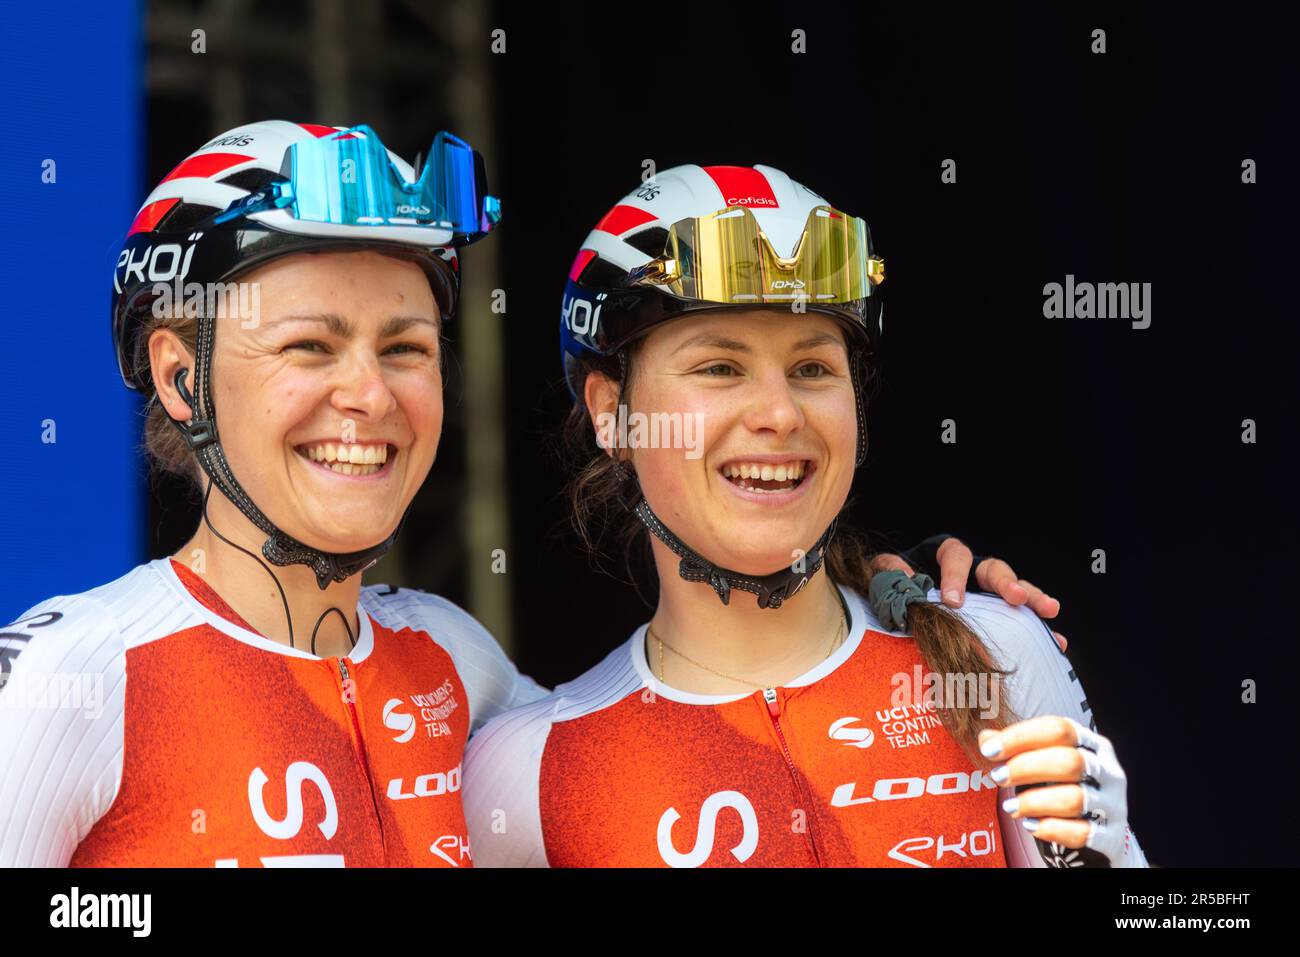 Cofidis Women Team riders at Classique UCI Women's WorldTour road race Stage 3, 2023 Ford RideLondon. Victoire Berteau, Gabrielle Pilote Fortin Stock Photo